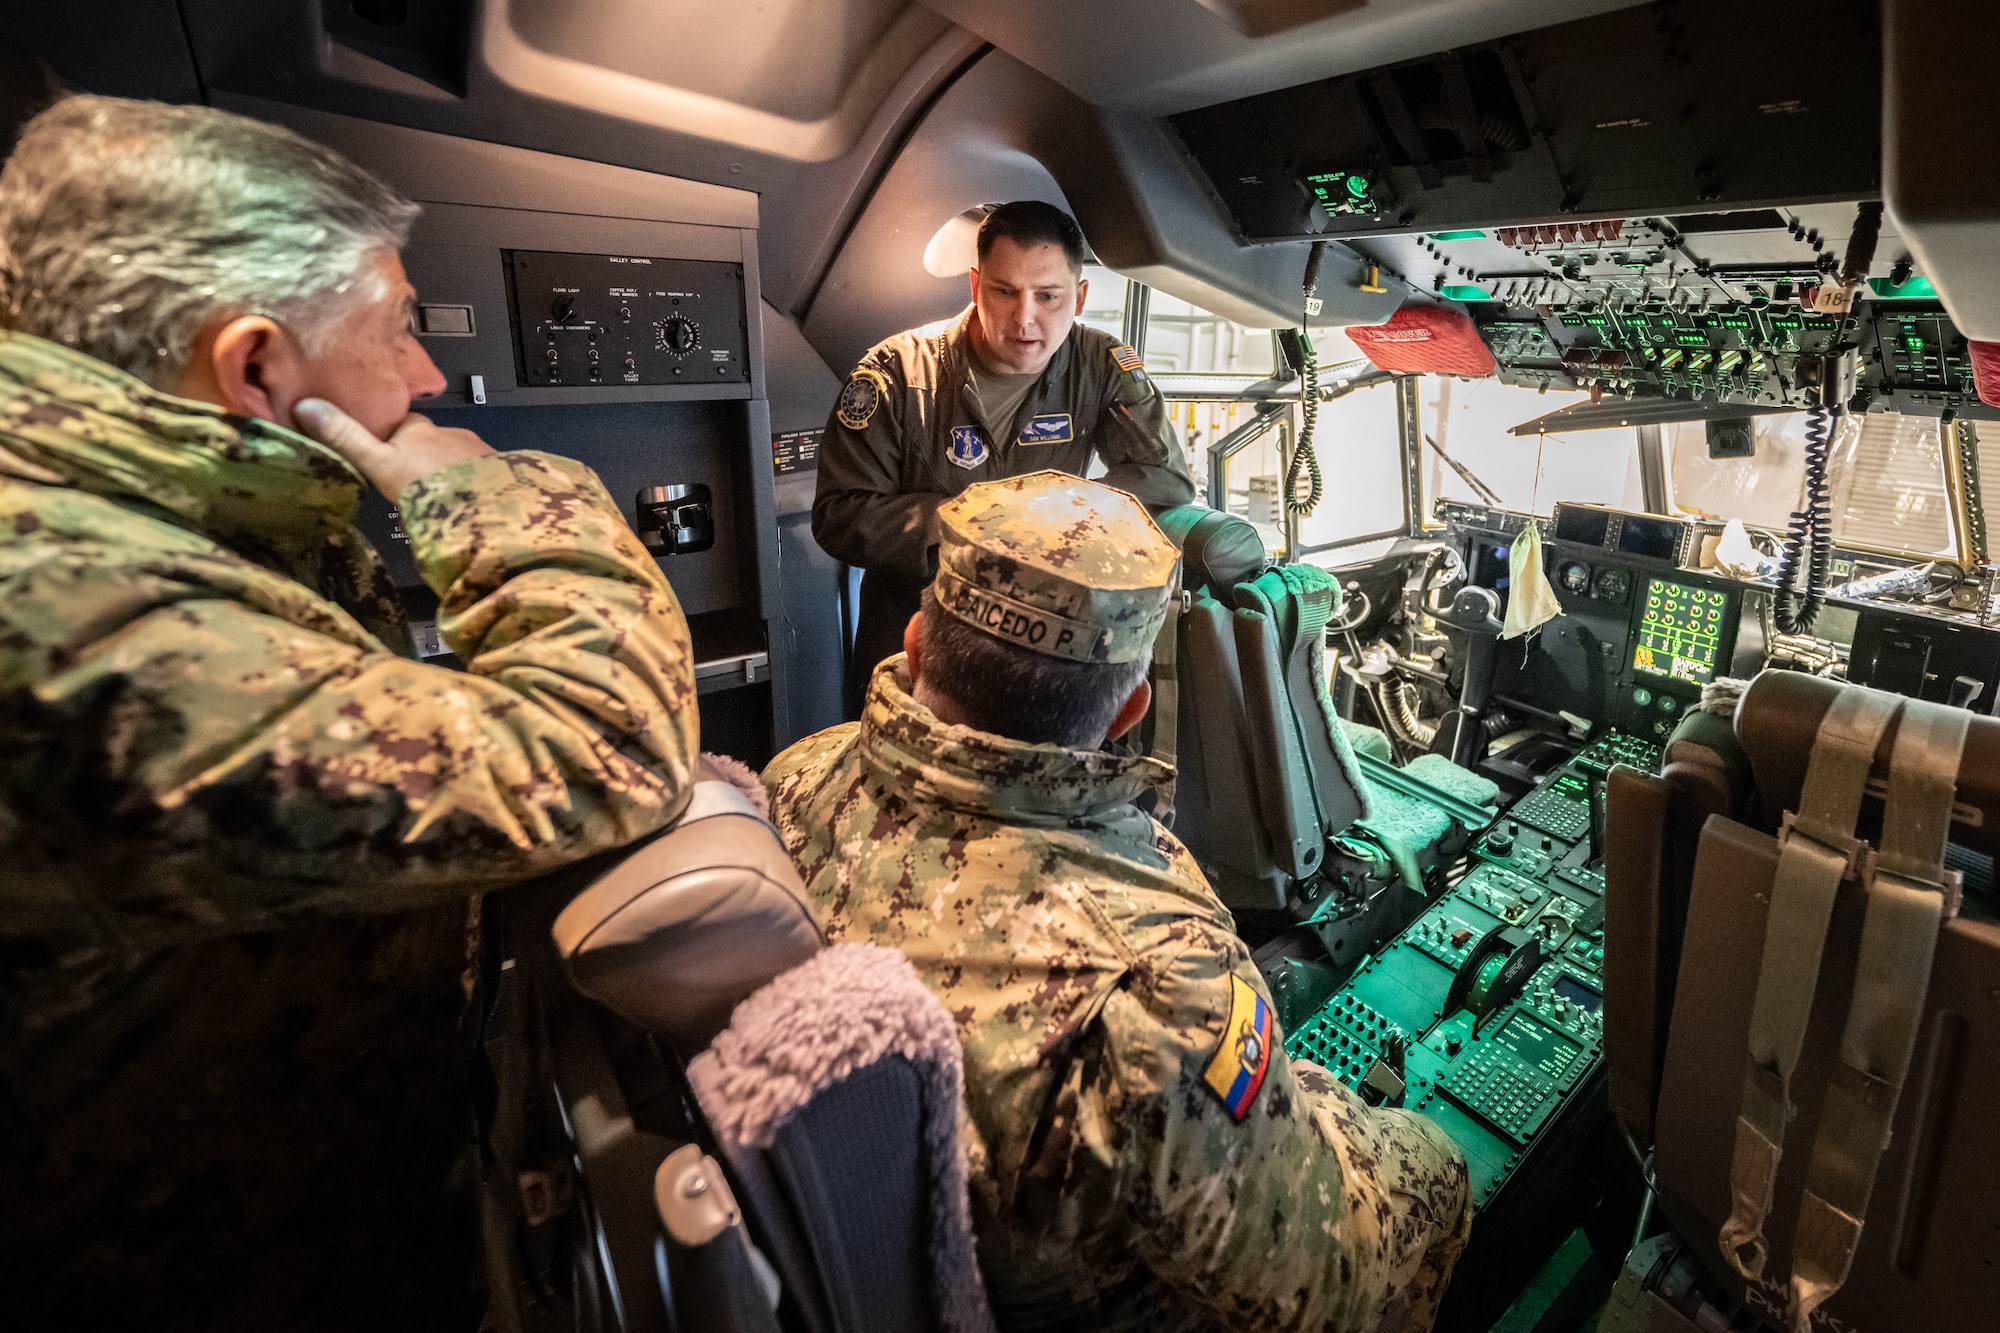 U.S. Air Force 1st Lt. Sam Williams, right, a C-130J Super Hercules pilot assigned to the Kentucky Air National Guard’s 123rd Airlift Wing, briefs senior leaders from the Ecuadorian military on the capabilities of the aircraft at the Kentucky Air National Guard Base in Louisville, Ky., Jan. 31, 2024. The Ecuadorians are visiting this week to exchange information with the Kentucky National Guard as part of the State Partnership Program, a National Guard Bureau effort that pairs Guard units with foreign allies to foster enhanced understanding across all aspects of civil and military affairs. (U.S. Air National Guard photo by Dale Greer)